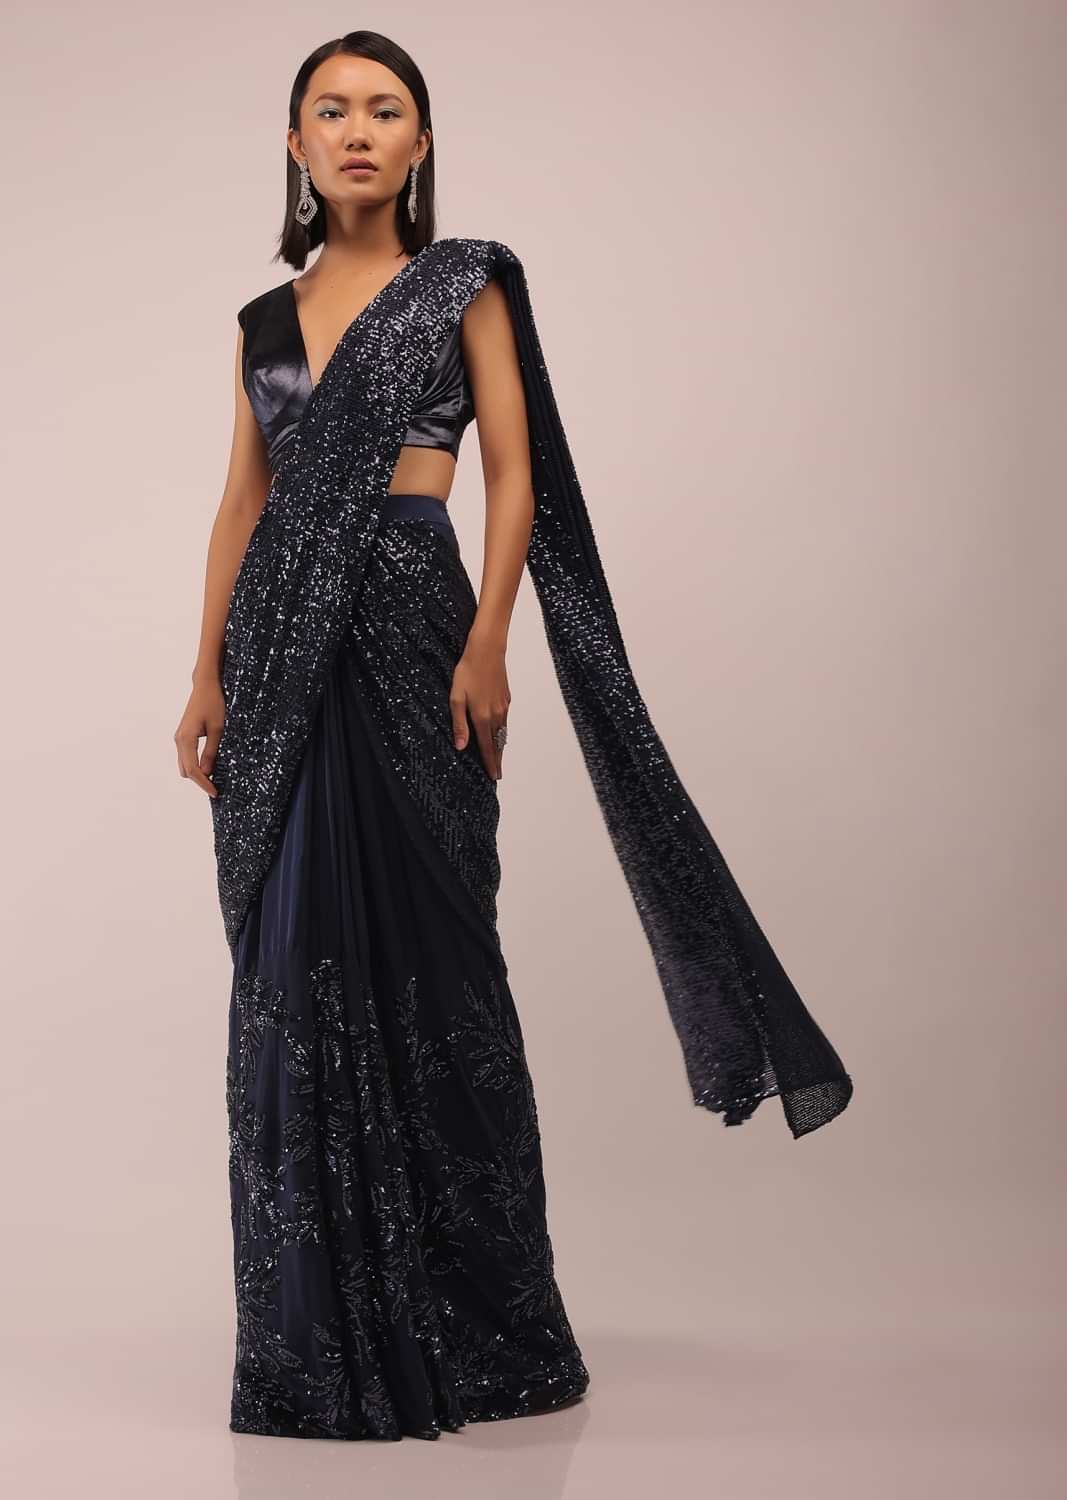 Blue Depths Ready-Pleated Saree In Sequins Embroidery, Crafted In Net With Floral Motifs With A Side Zip Hooks Closure